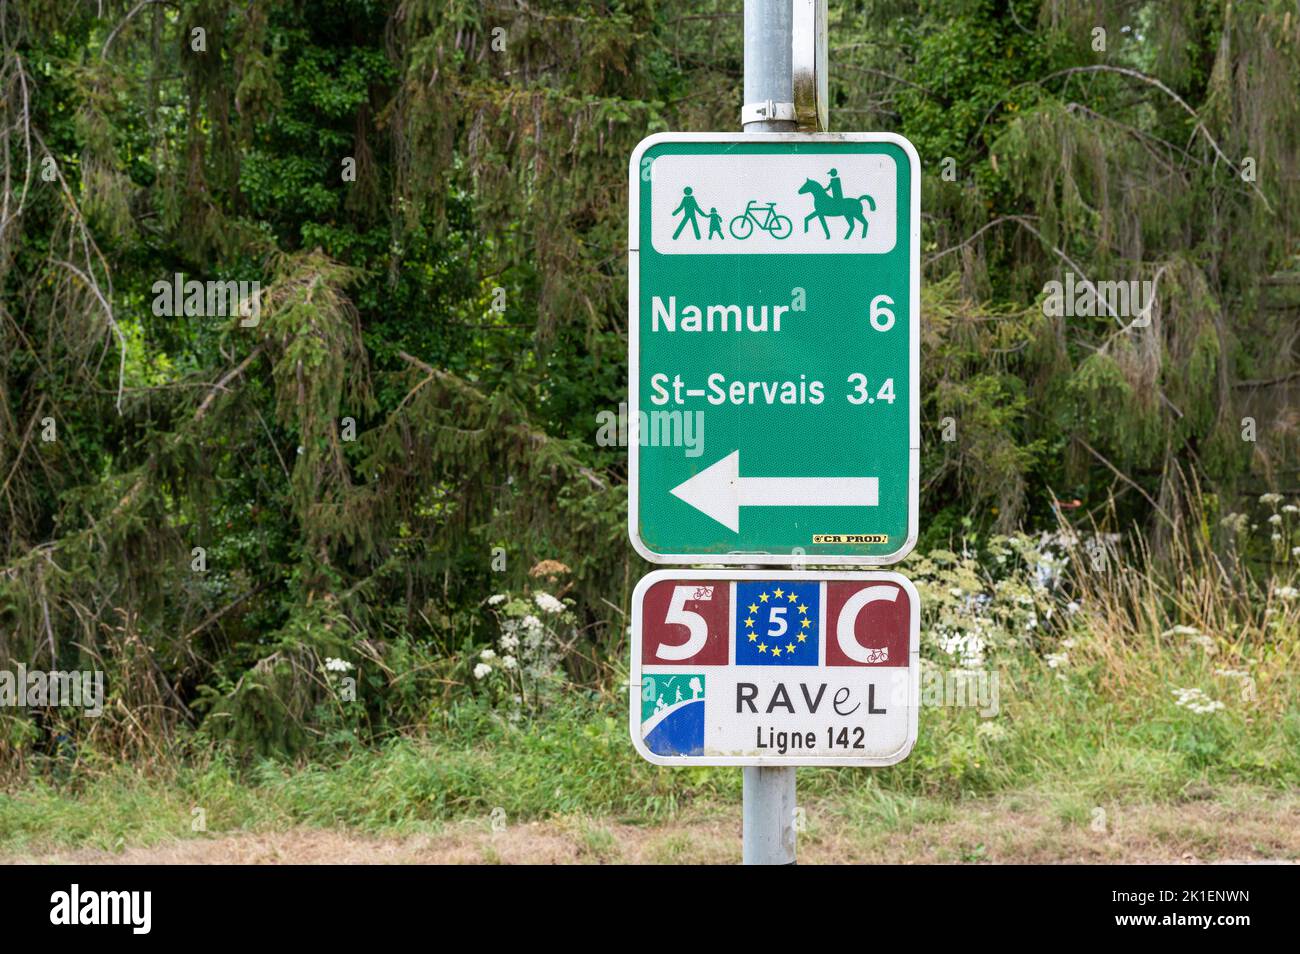 Saint-Servais, Wallon Region, Belgium - 08 01 2022 - Direction sign with distance indication at the Ravel biking trail Stock Photo